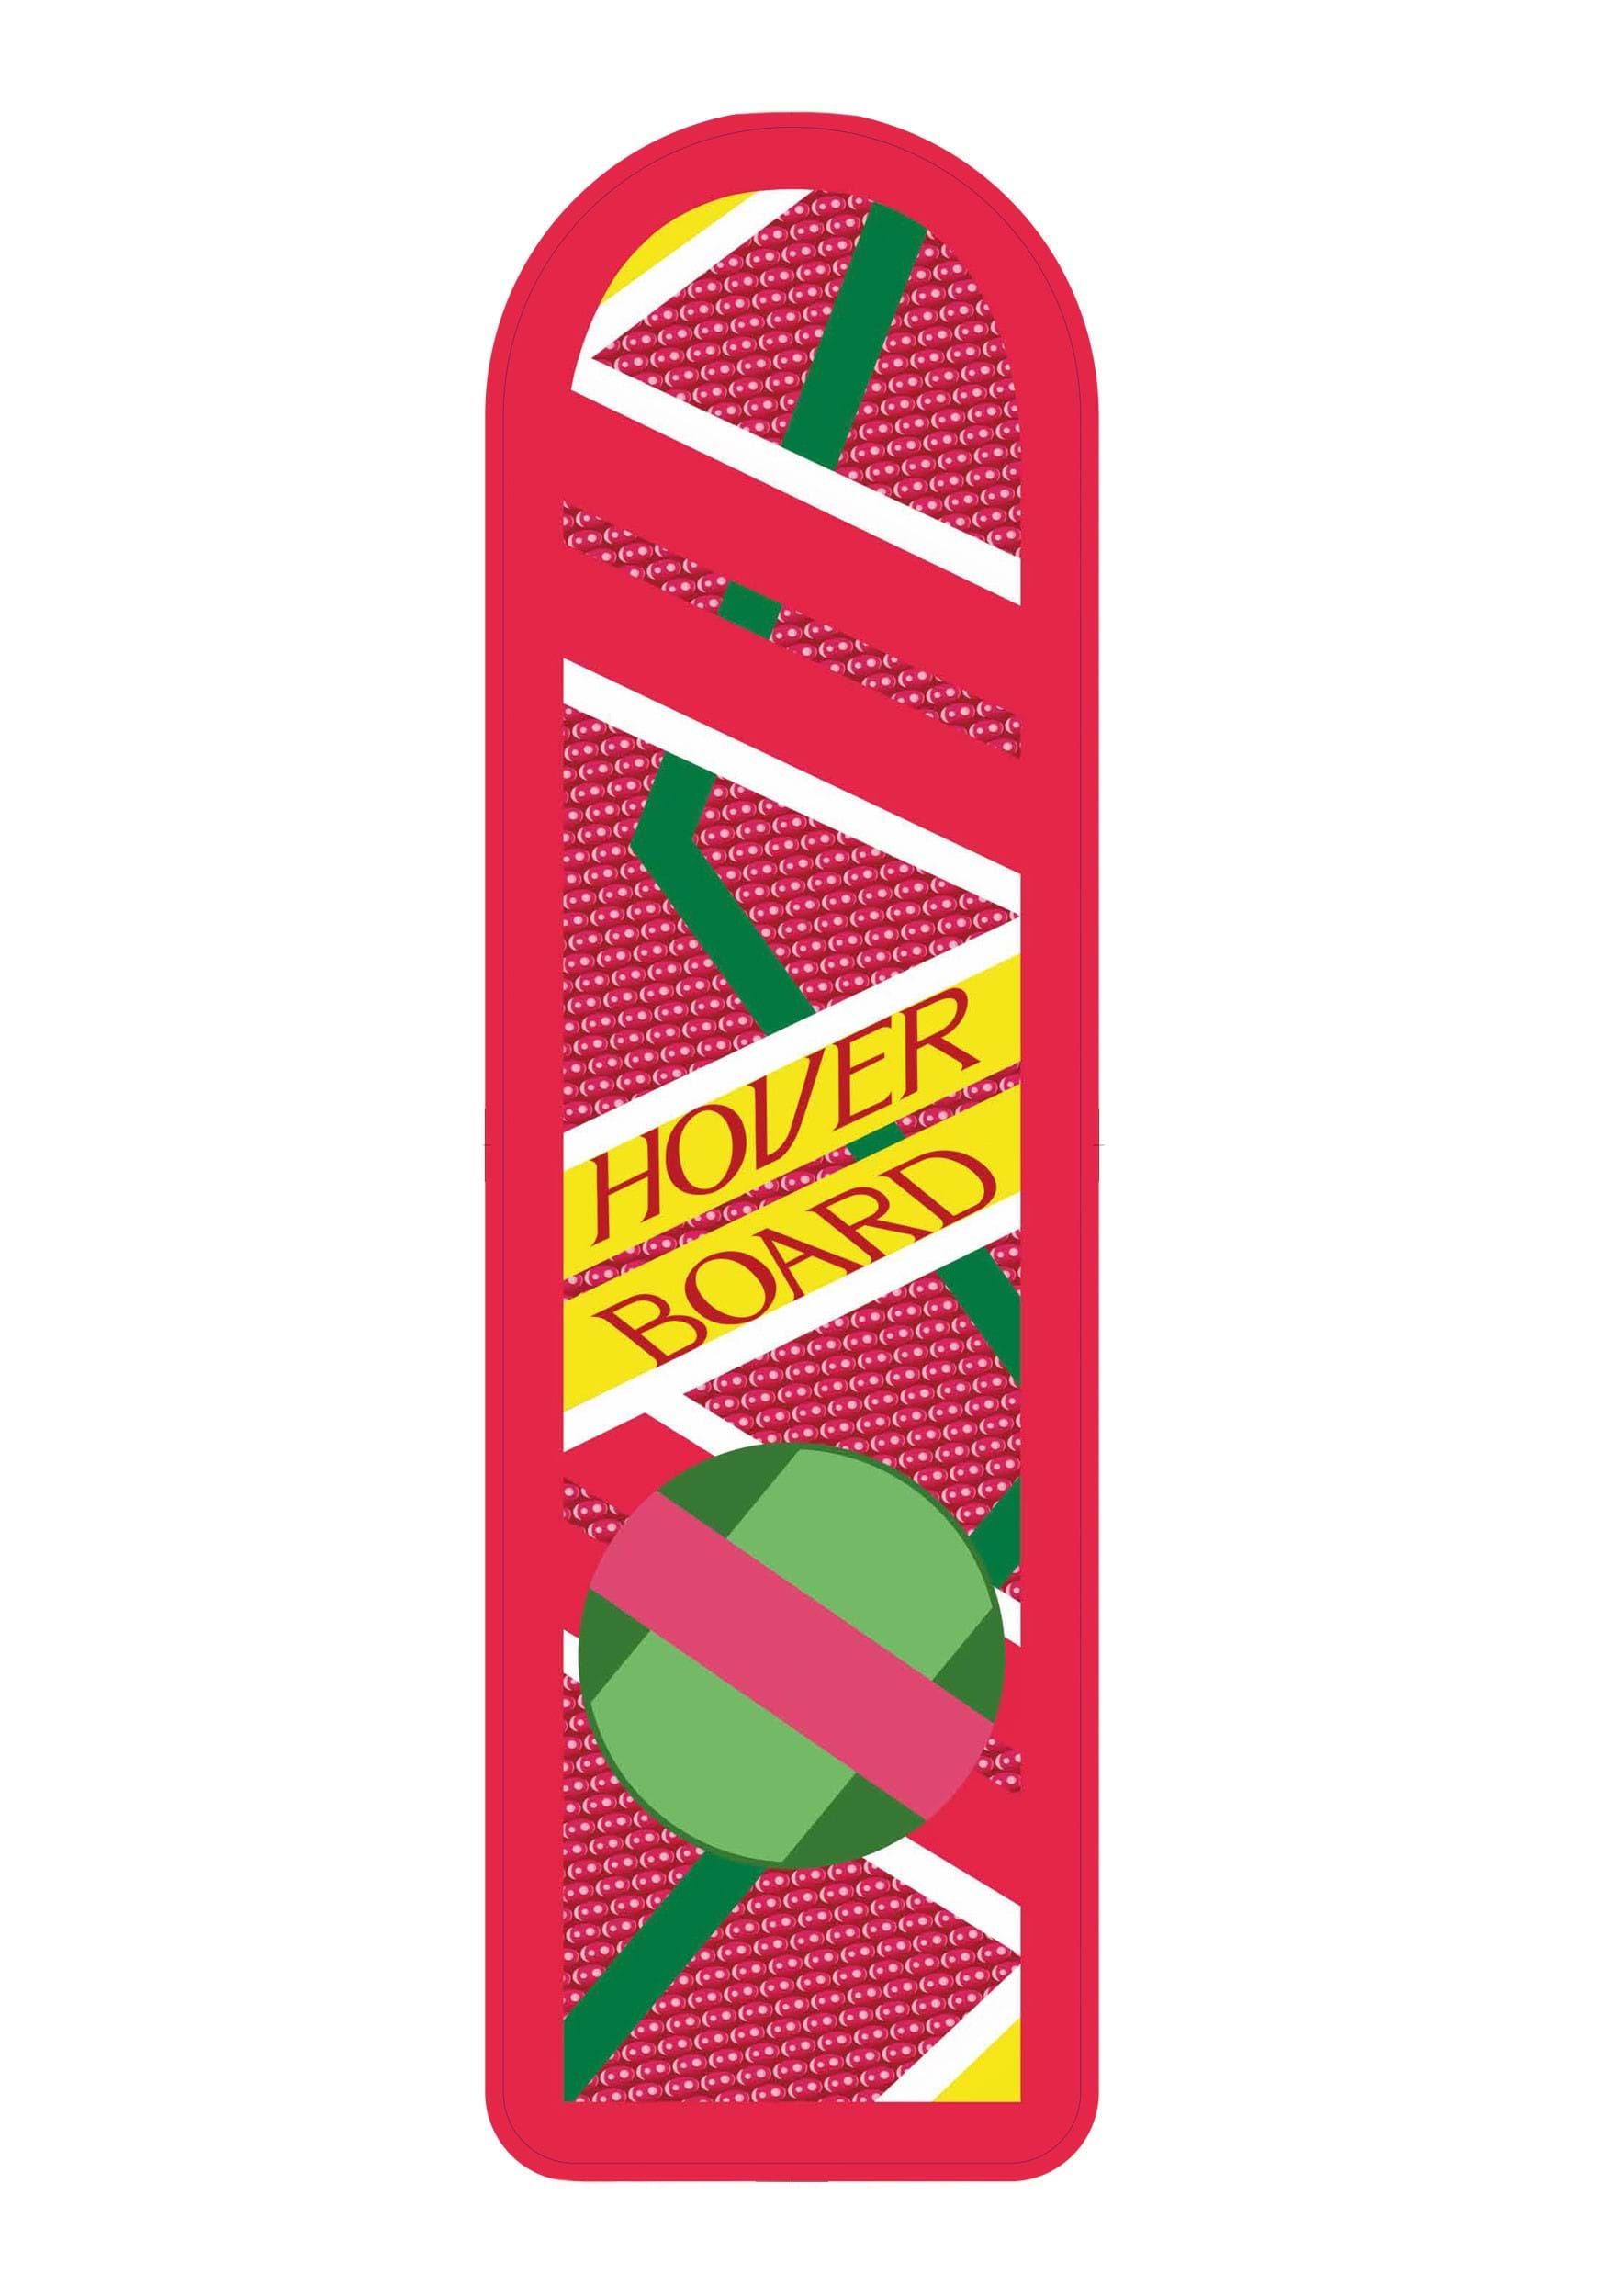 Back To The Future Hoverboard Prop